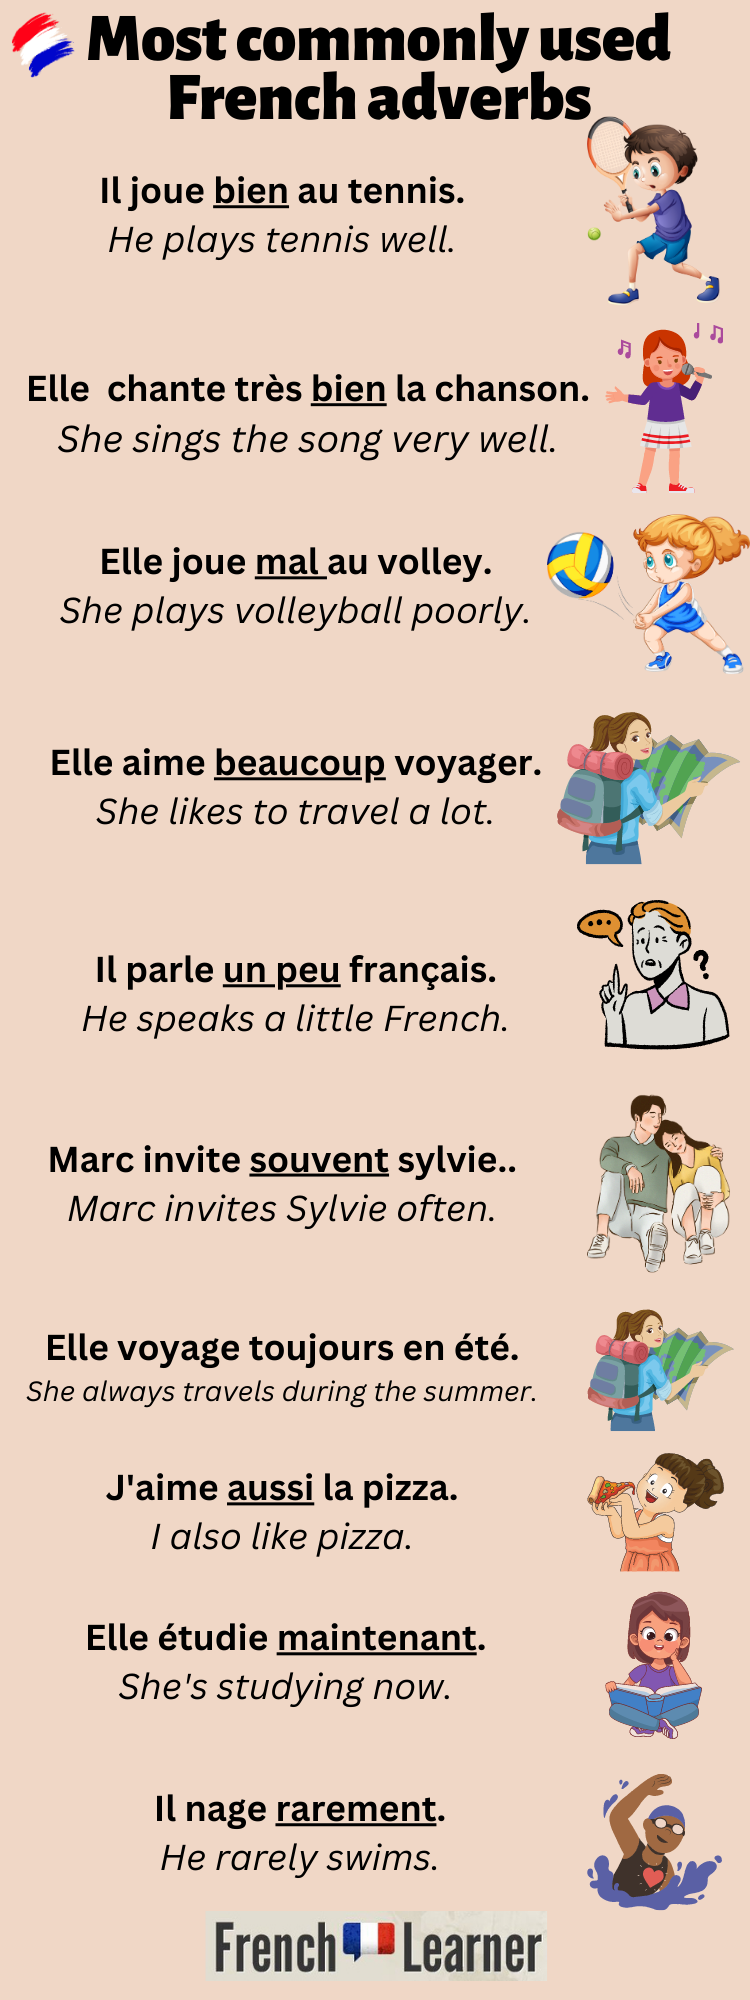 How To Form Use French Adverbs 100 Essential Words 